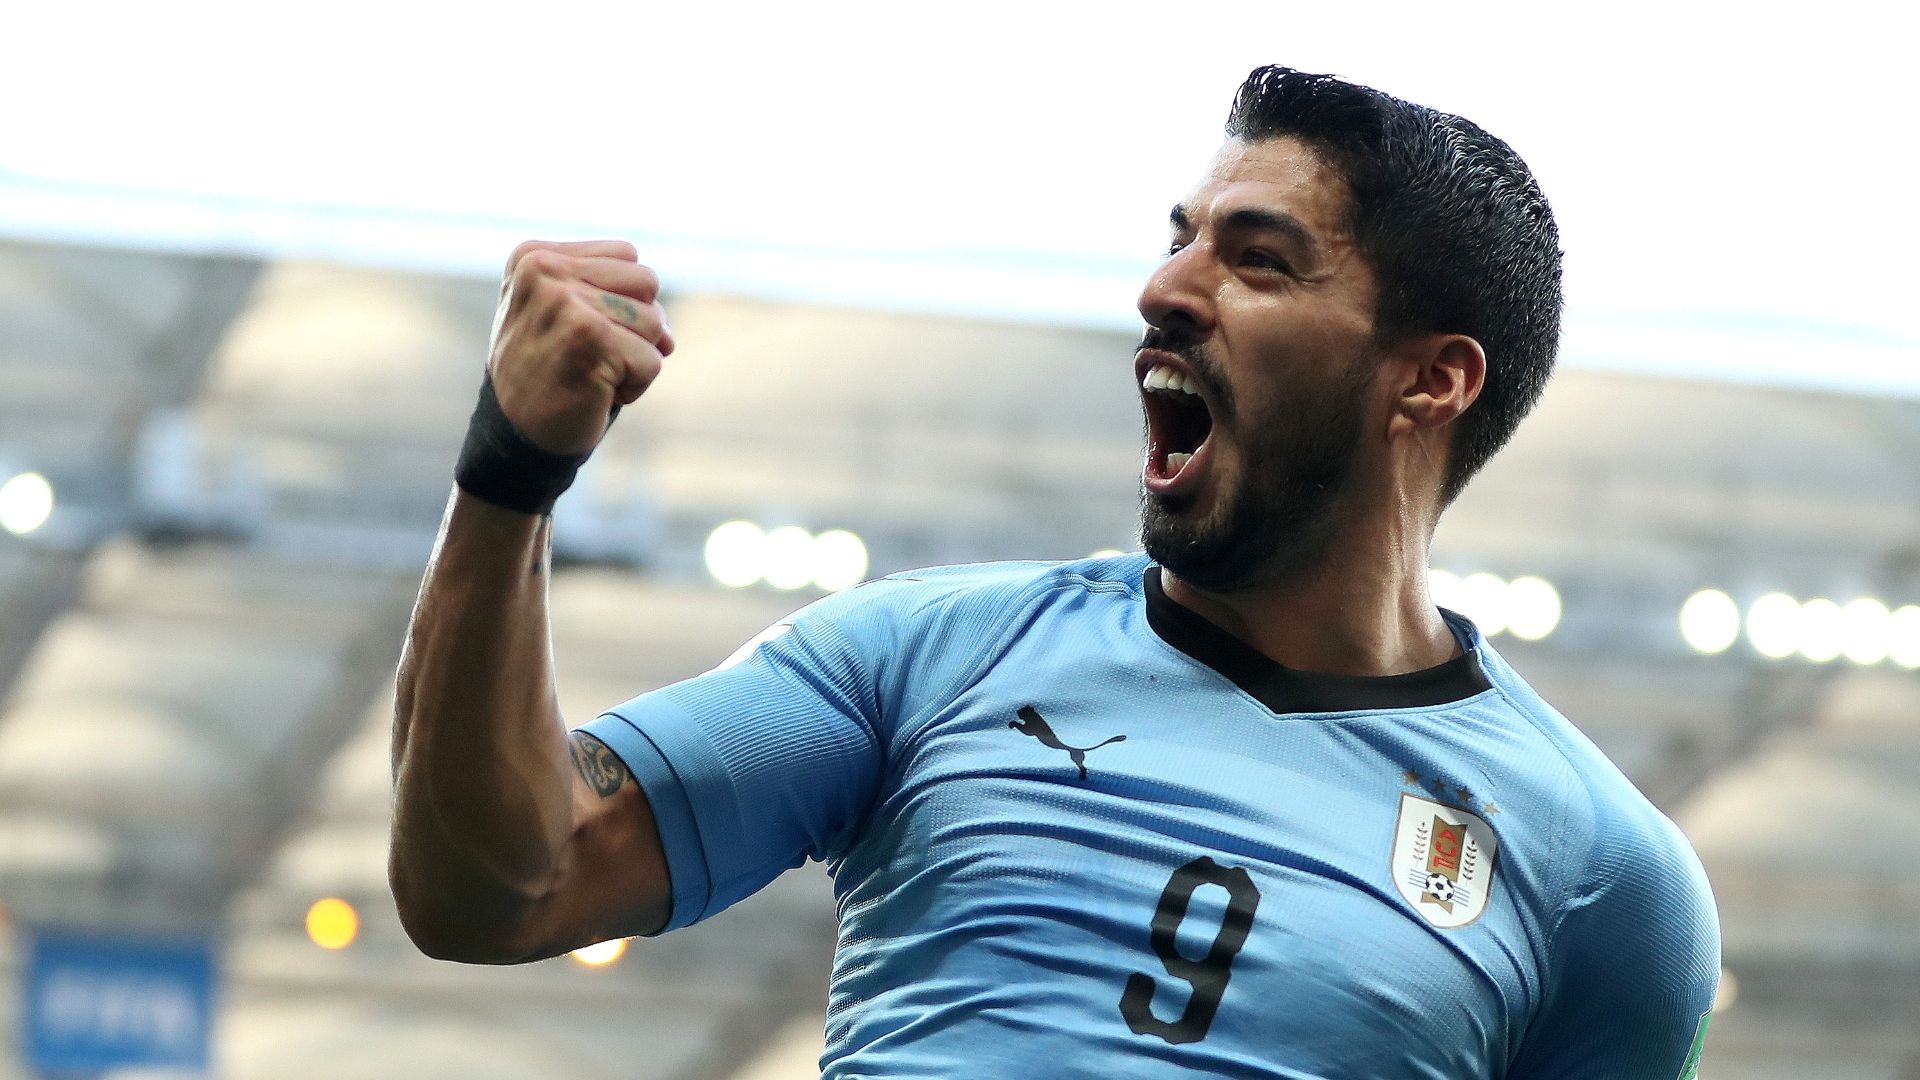 Best Luis Suarez Uruguay Wallpaper with image resolution 1920x1080 pixel. You can use this wallpaper as background for your desktop Computer Screensavers, Android or iPhone smartphones